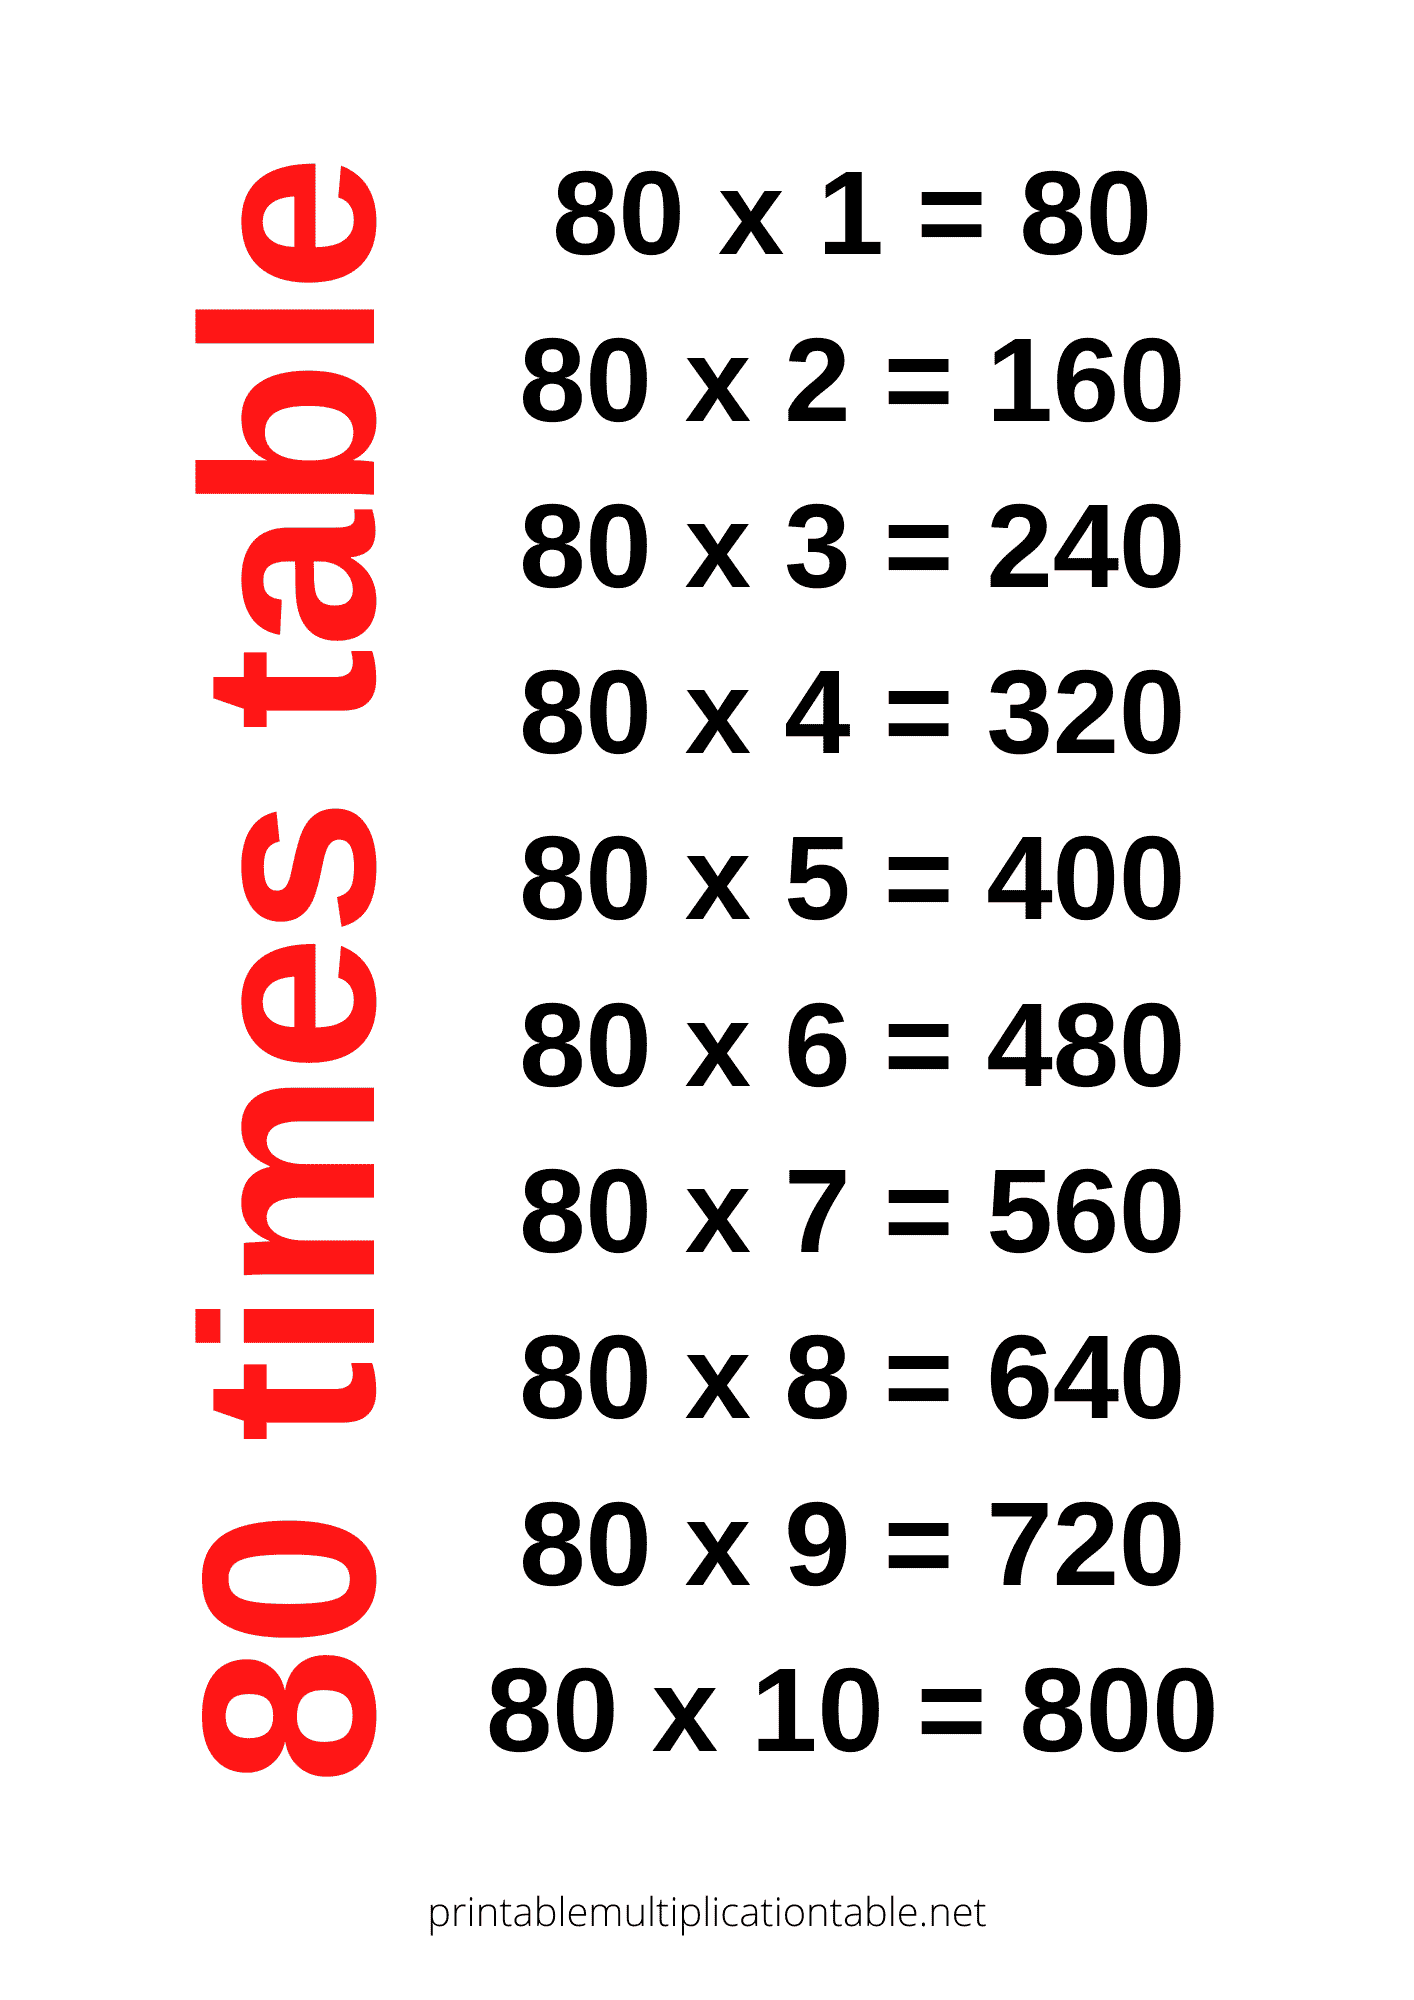 80 times table chart